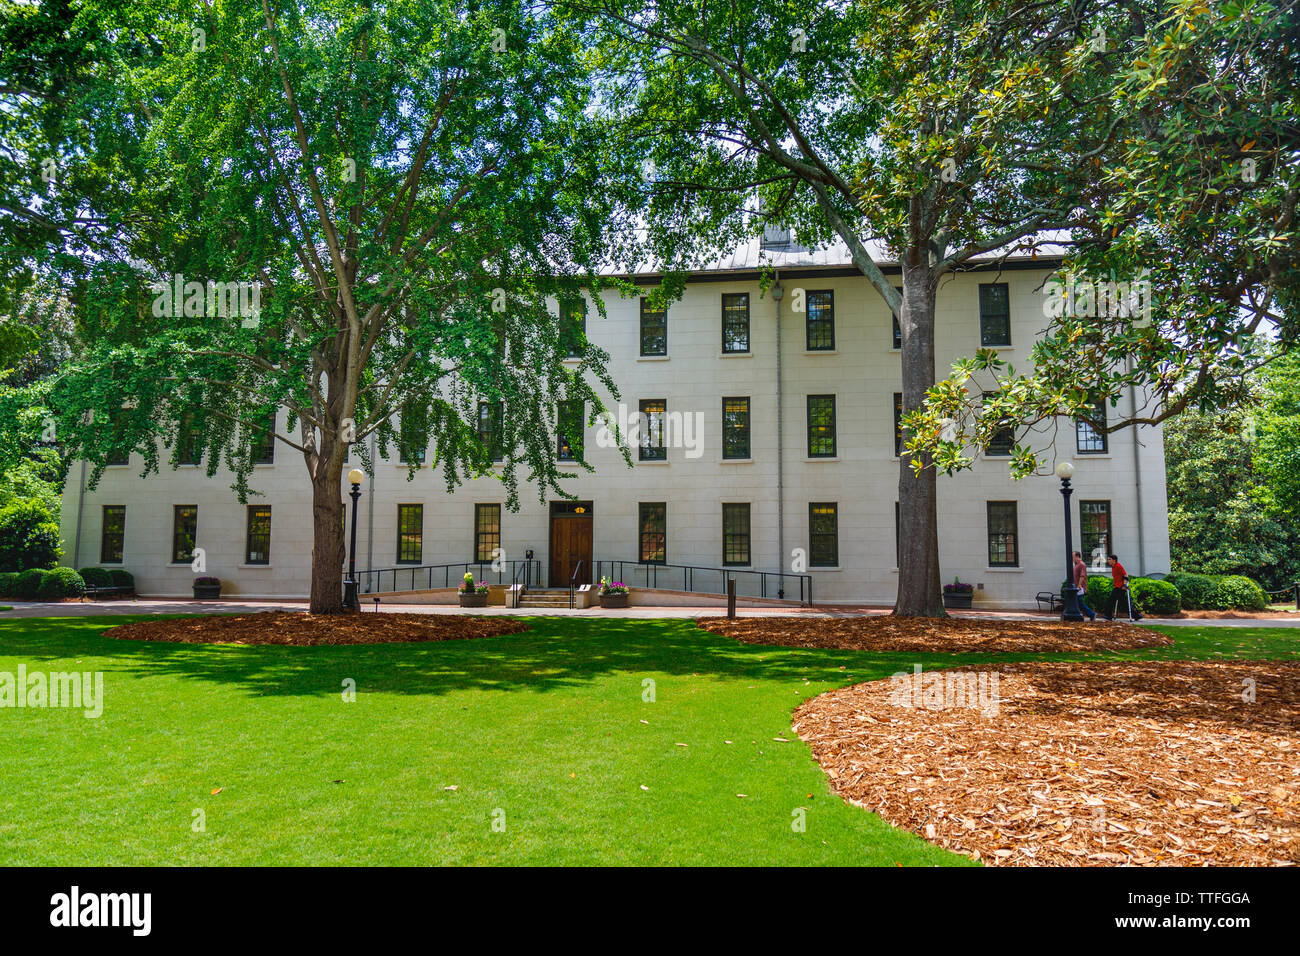 ATHENS, GA, USA - May 3: New College on May 3, 2019 at the University of Georgia, North Campus in Athens, Georgia. Stock Photo